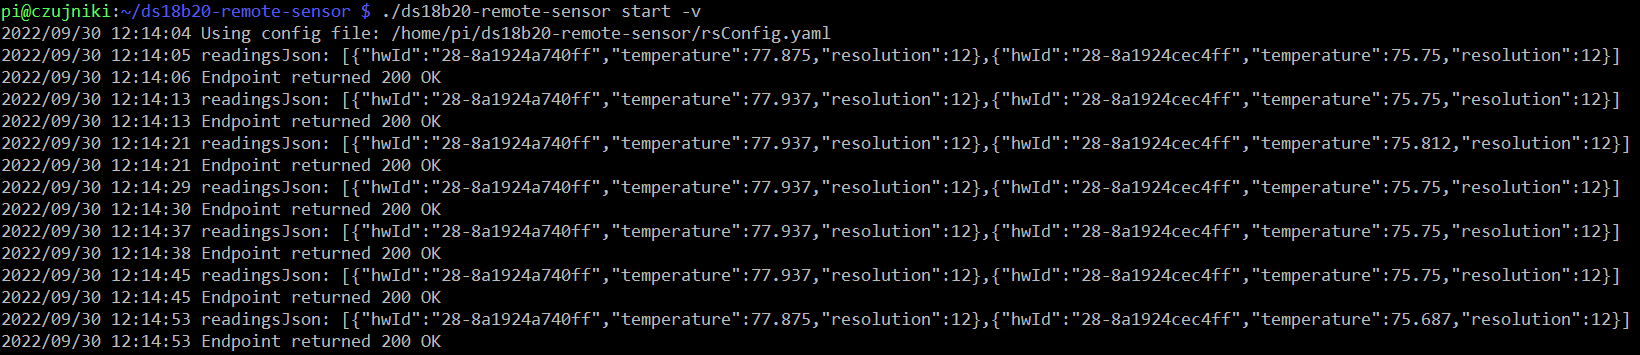 screenshot of the program running in verbose mode showing serialized readings and the HTTP response codes